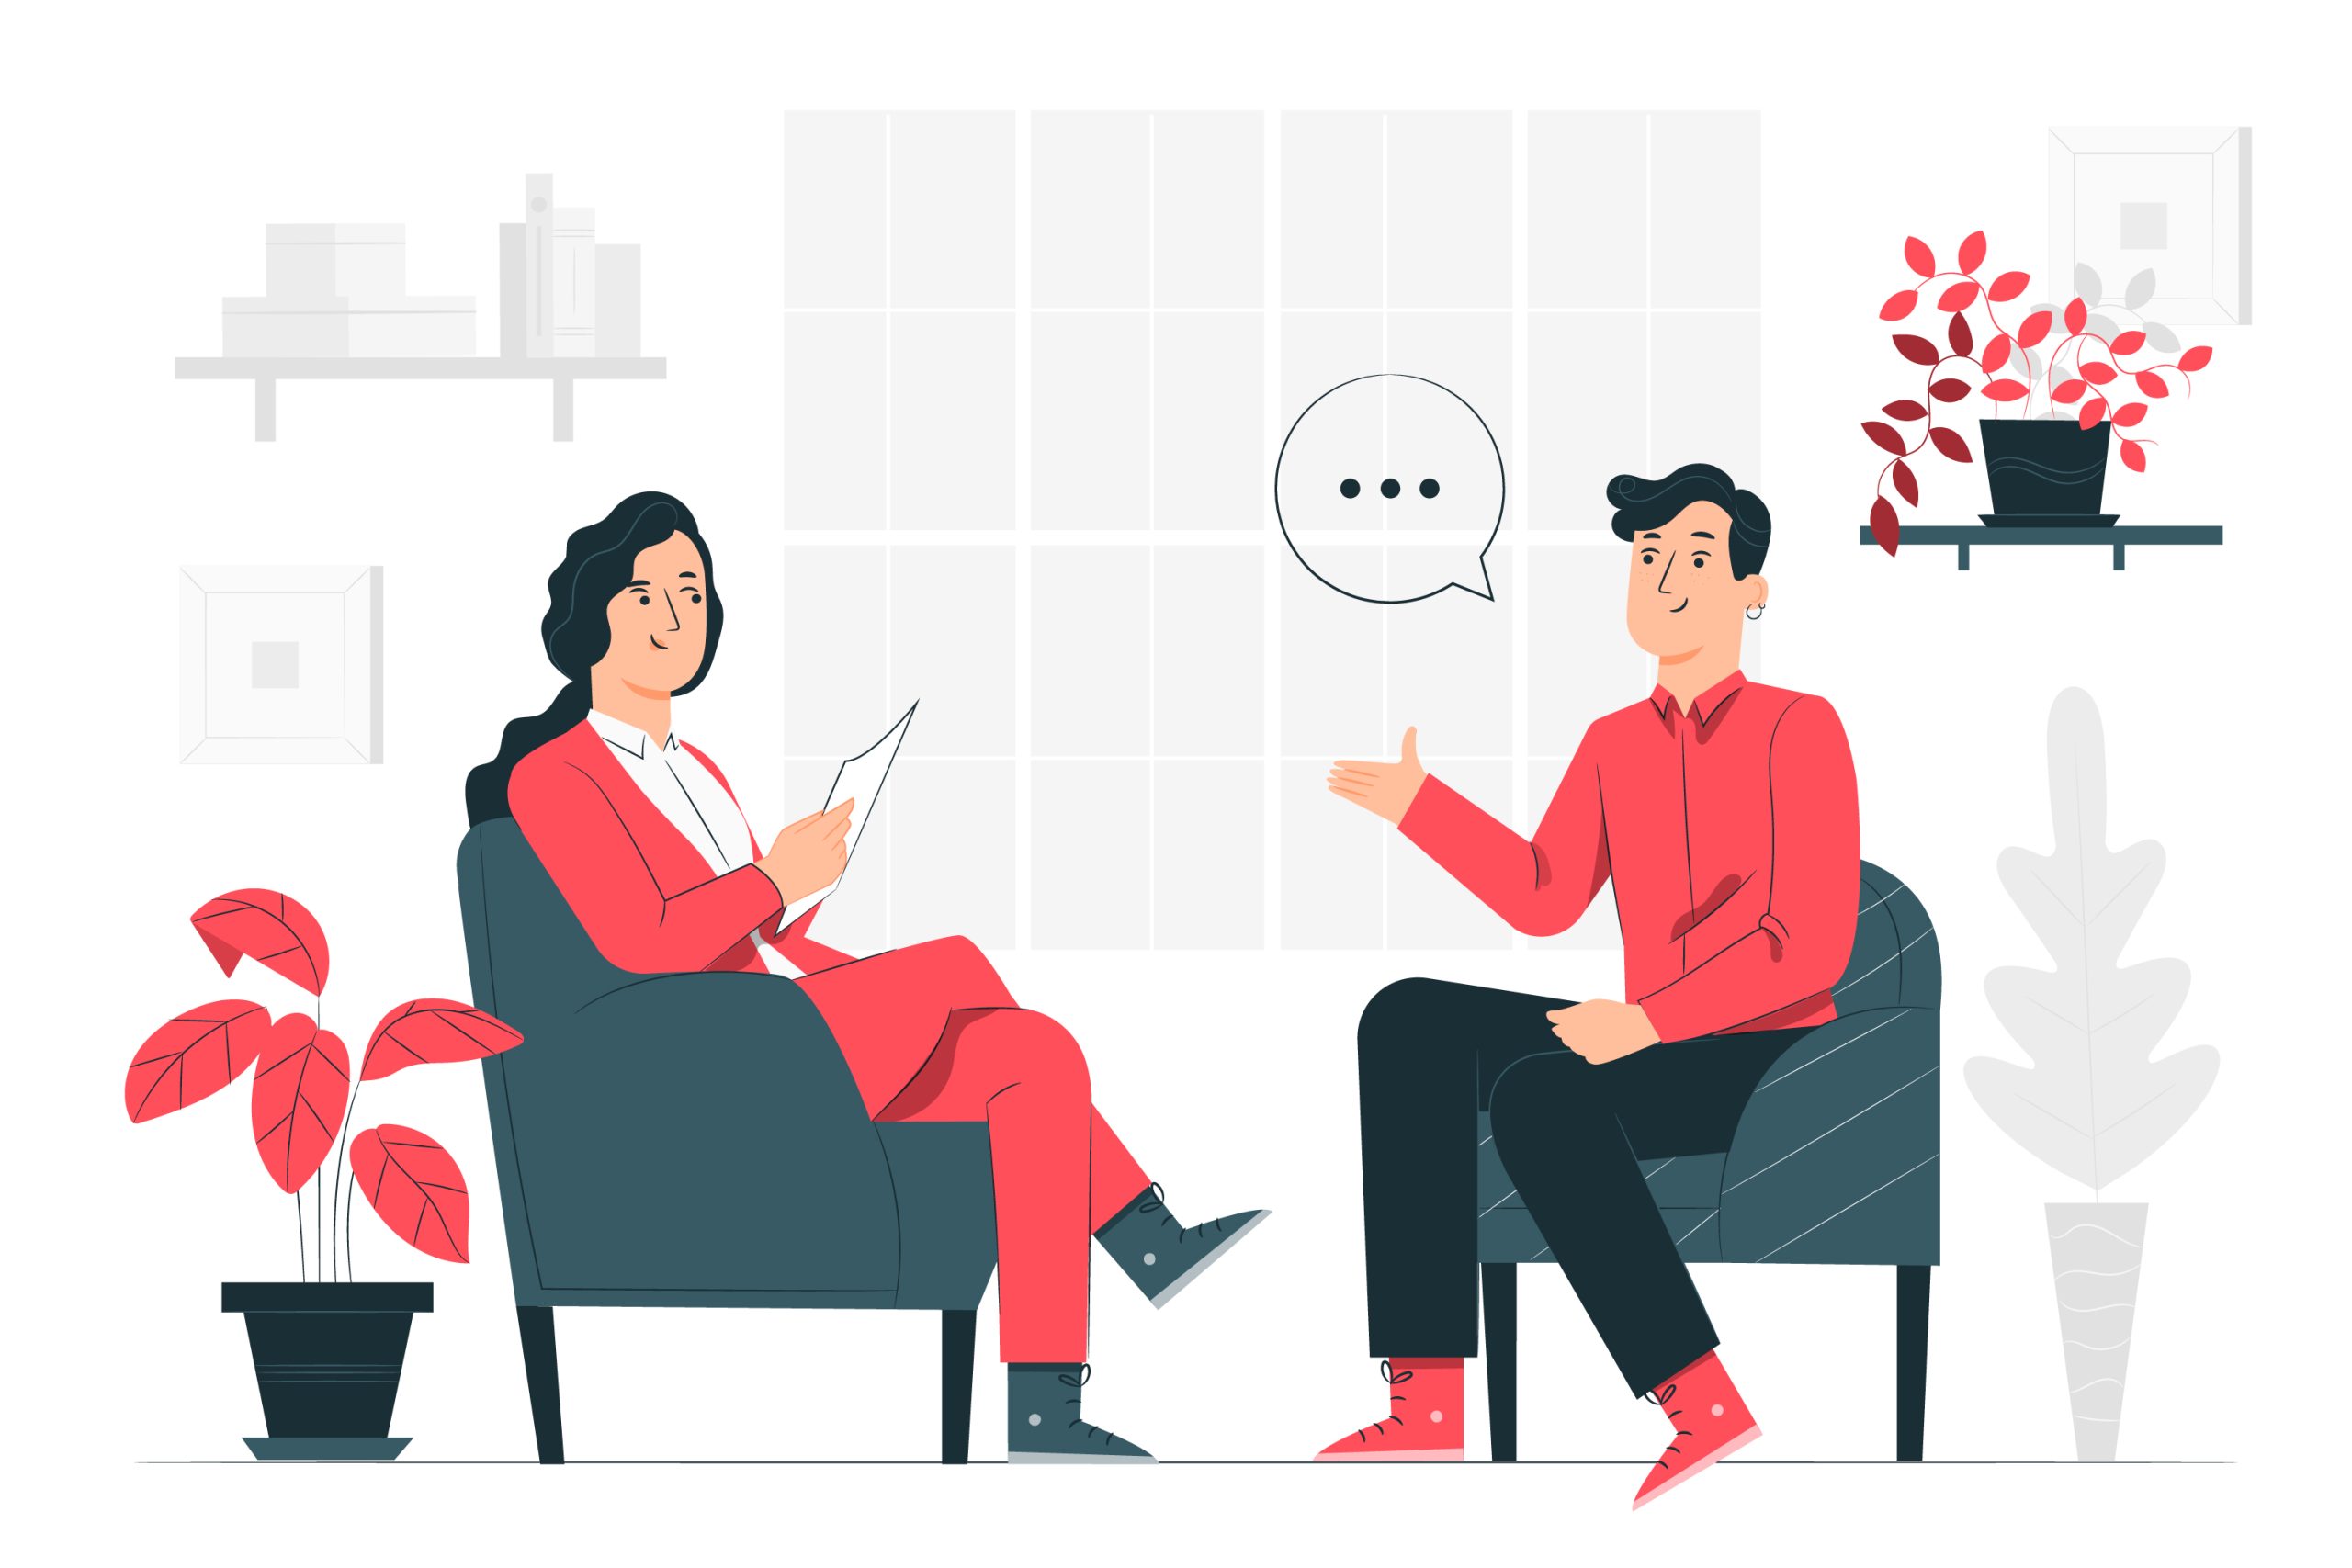 An illustration of people having an interview together